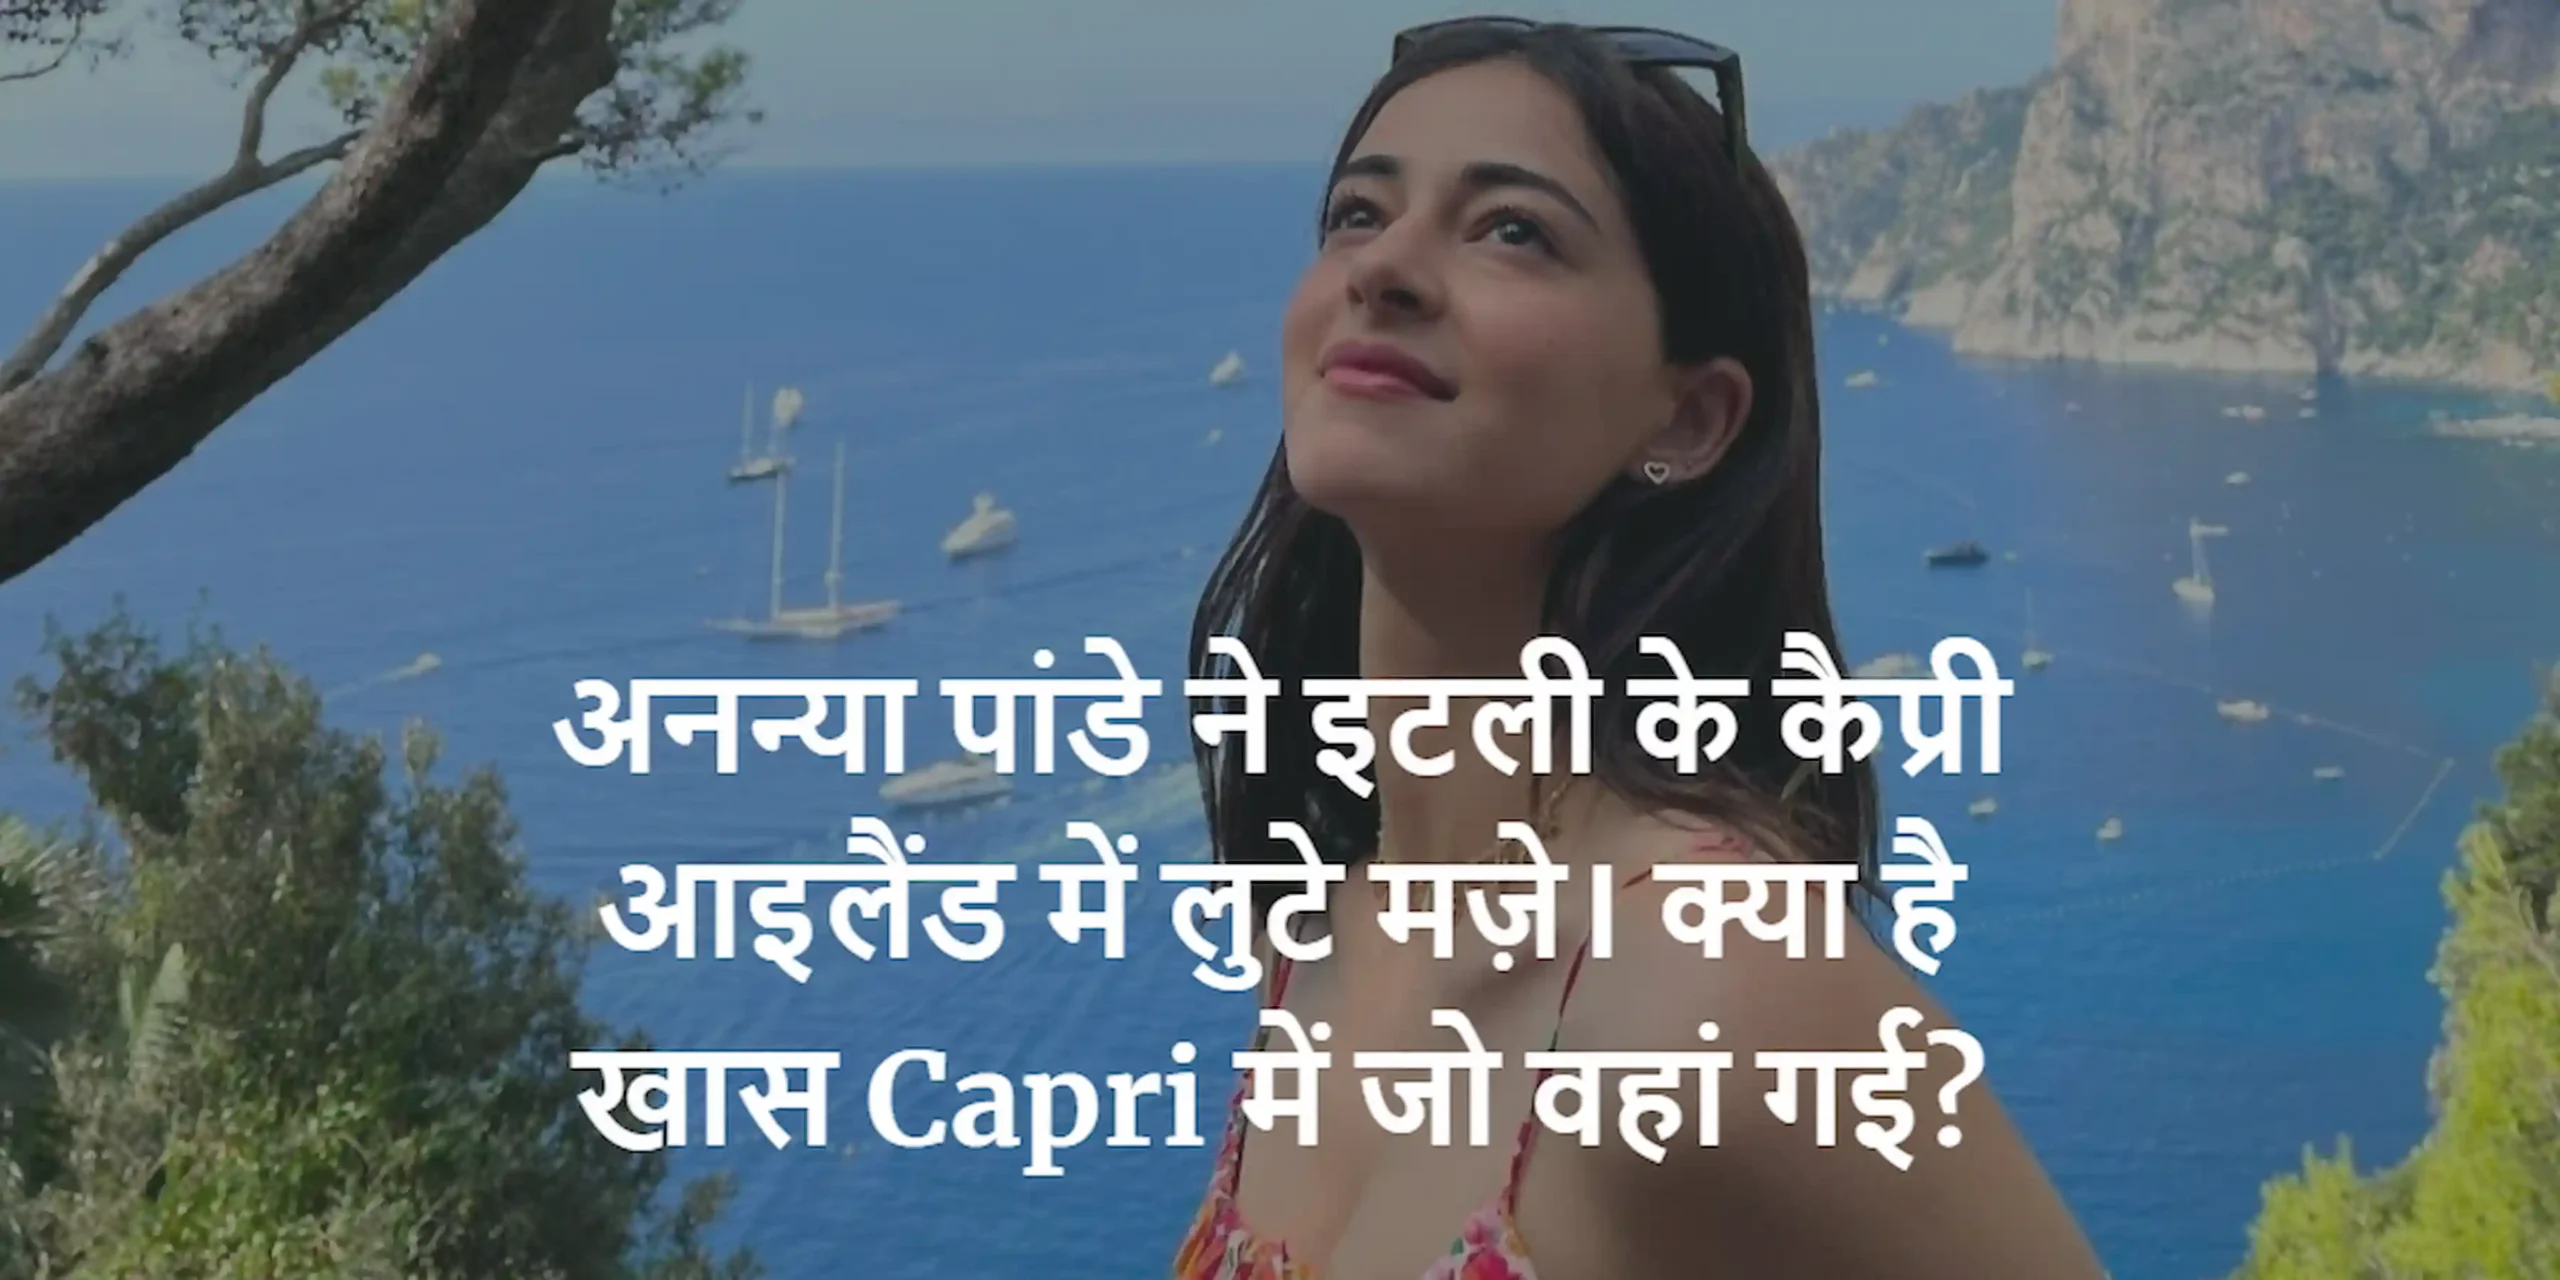 Ananya Pandey had fun in Capri Island Italy. Whats special about Capri that went there scaled